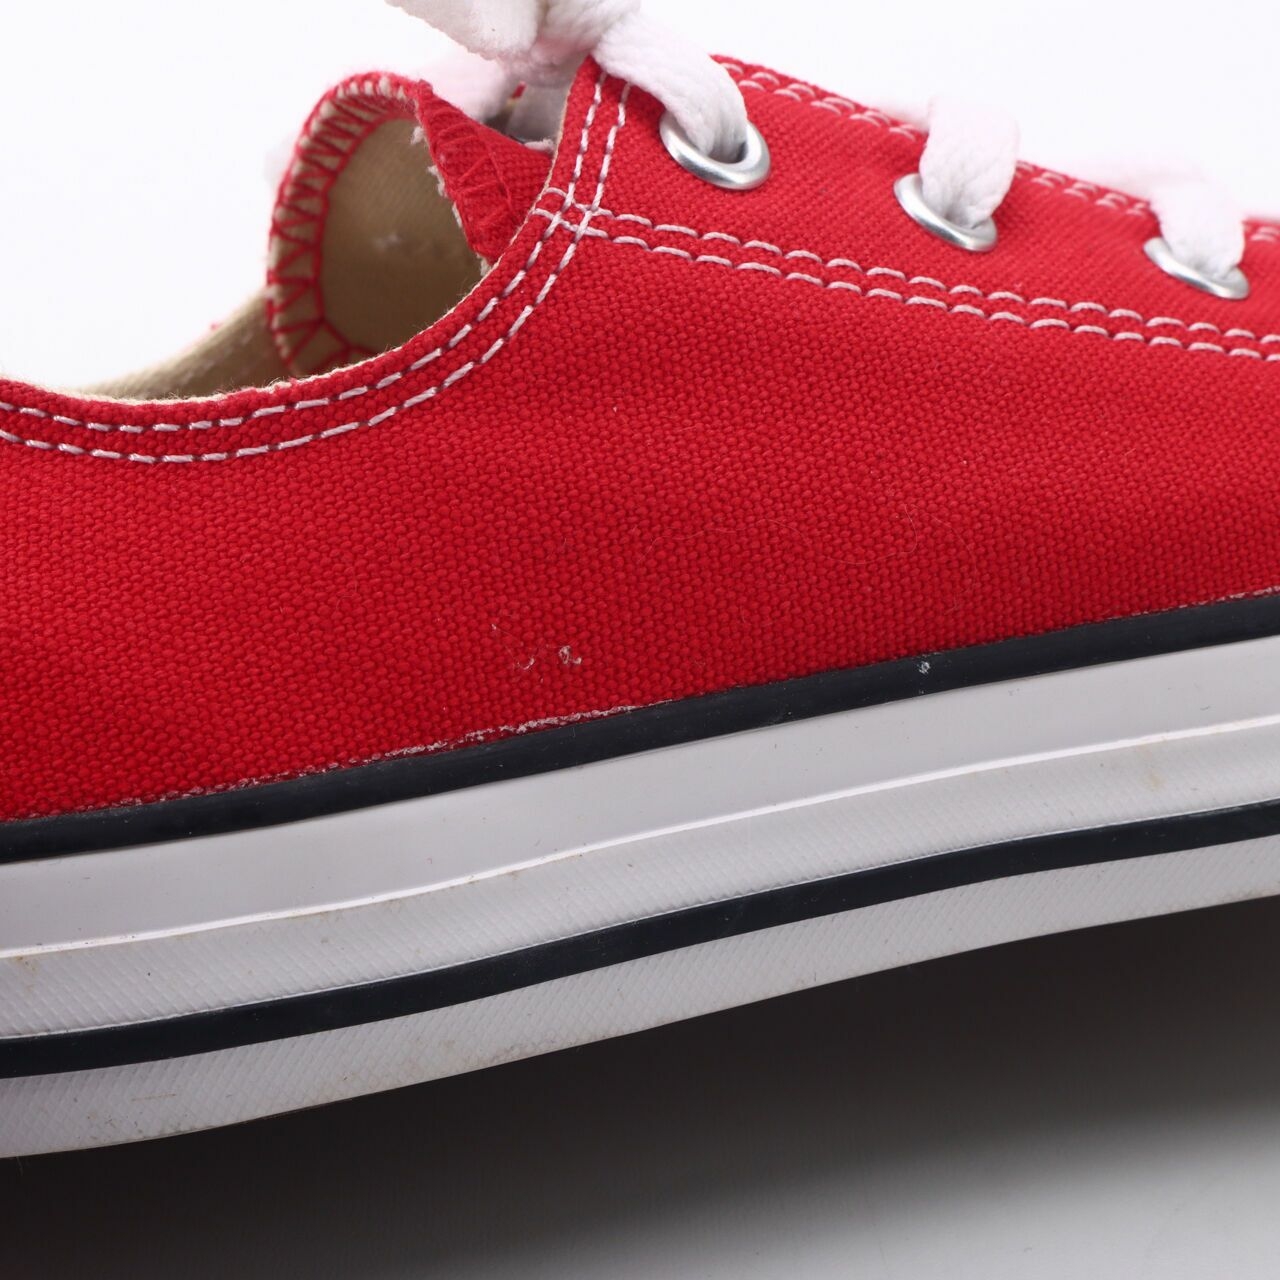 Converse Chuck Taylor All Star OX Red White Canvas